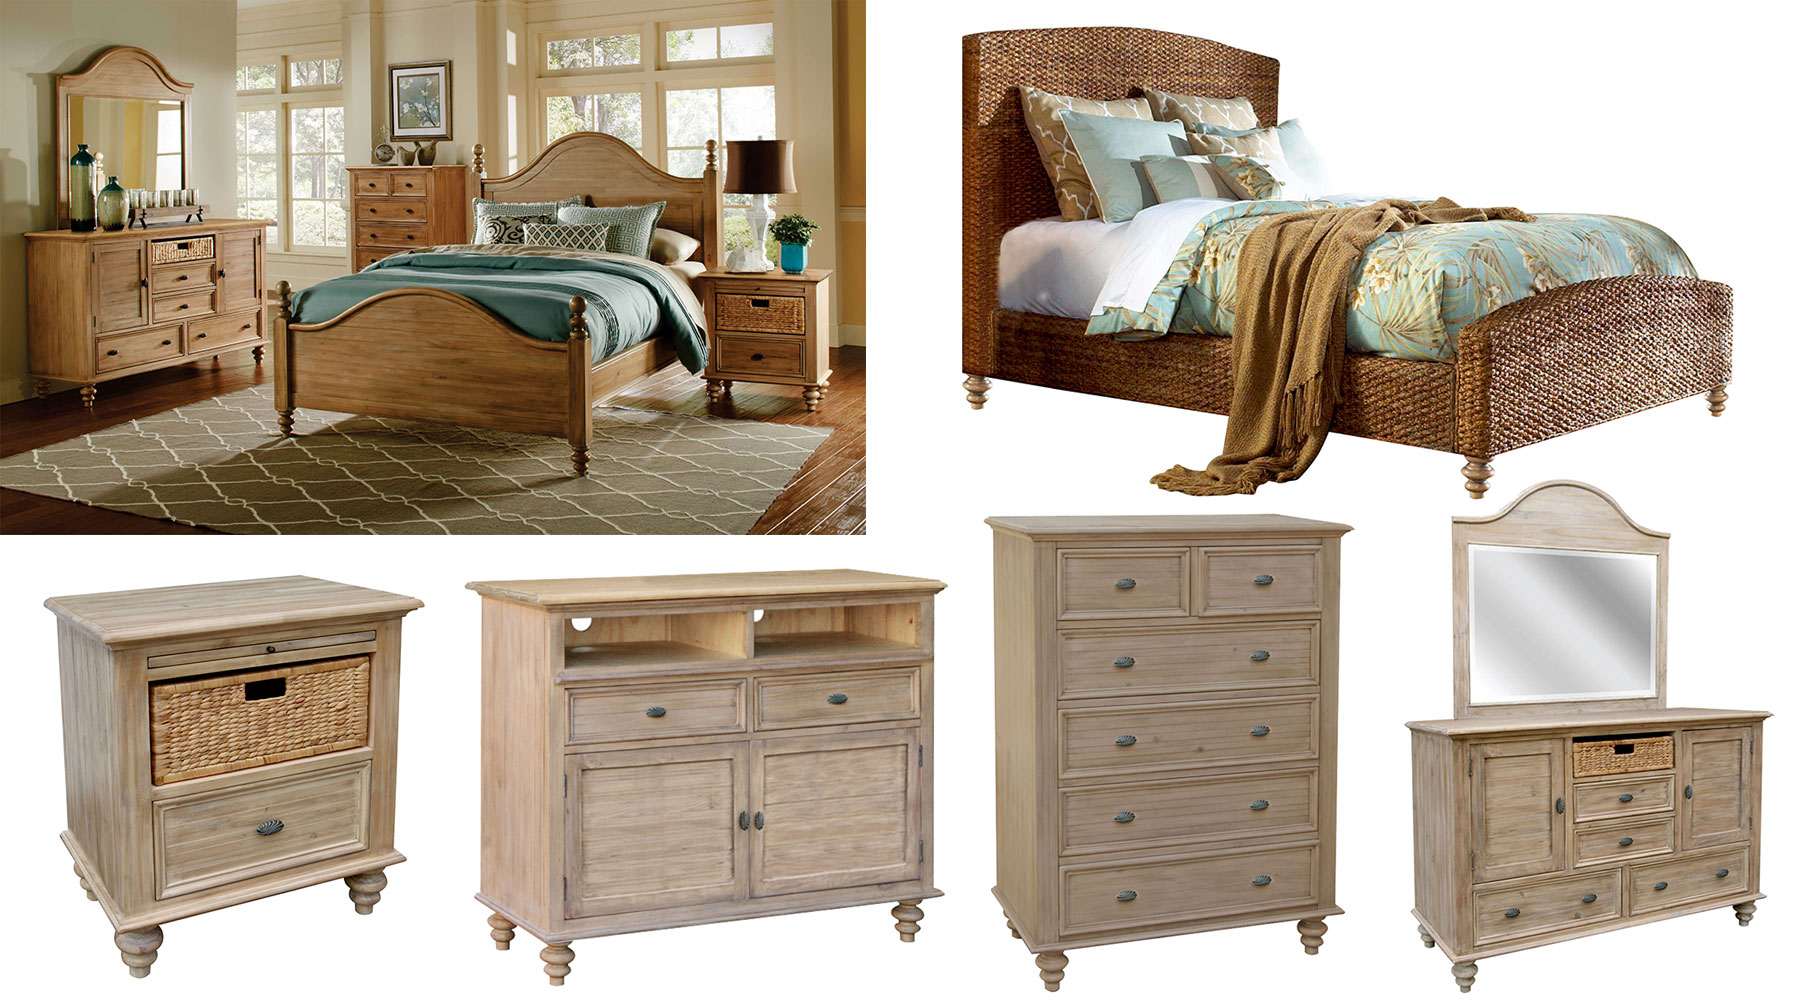 Bedroom Sets intended for dimensions 1800 X 1000